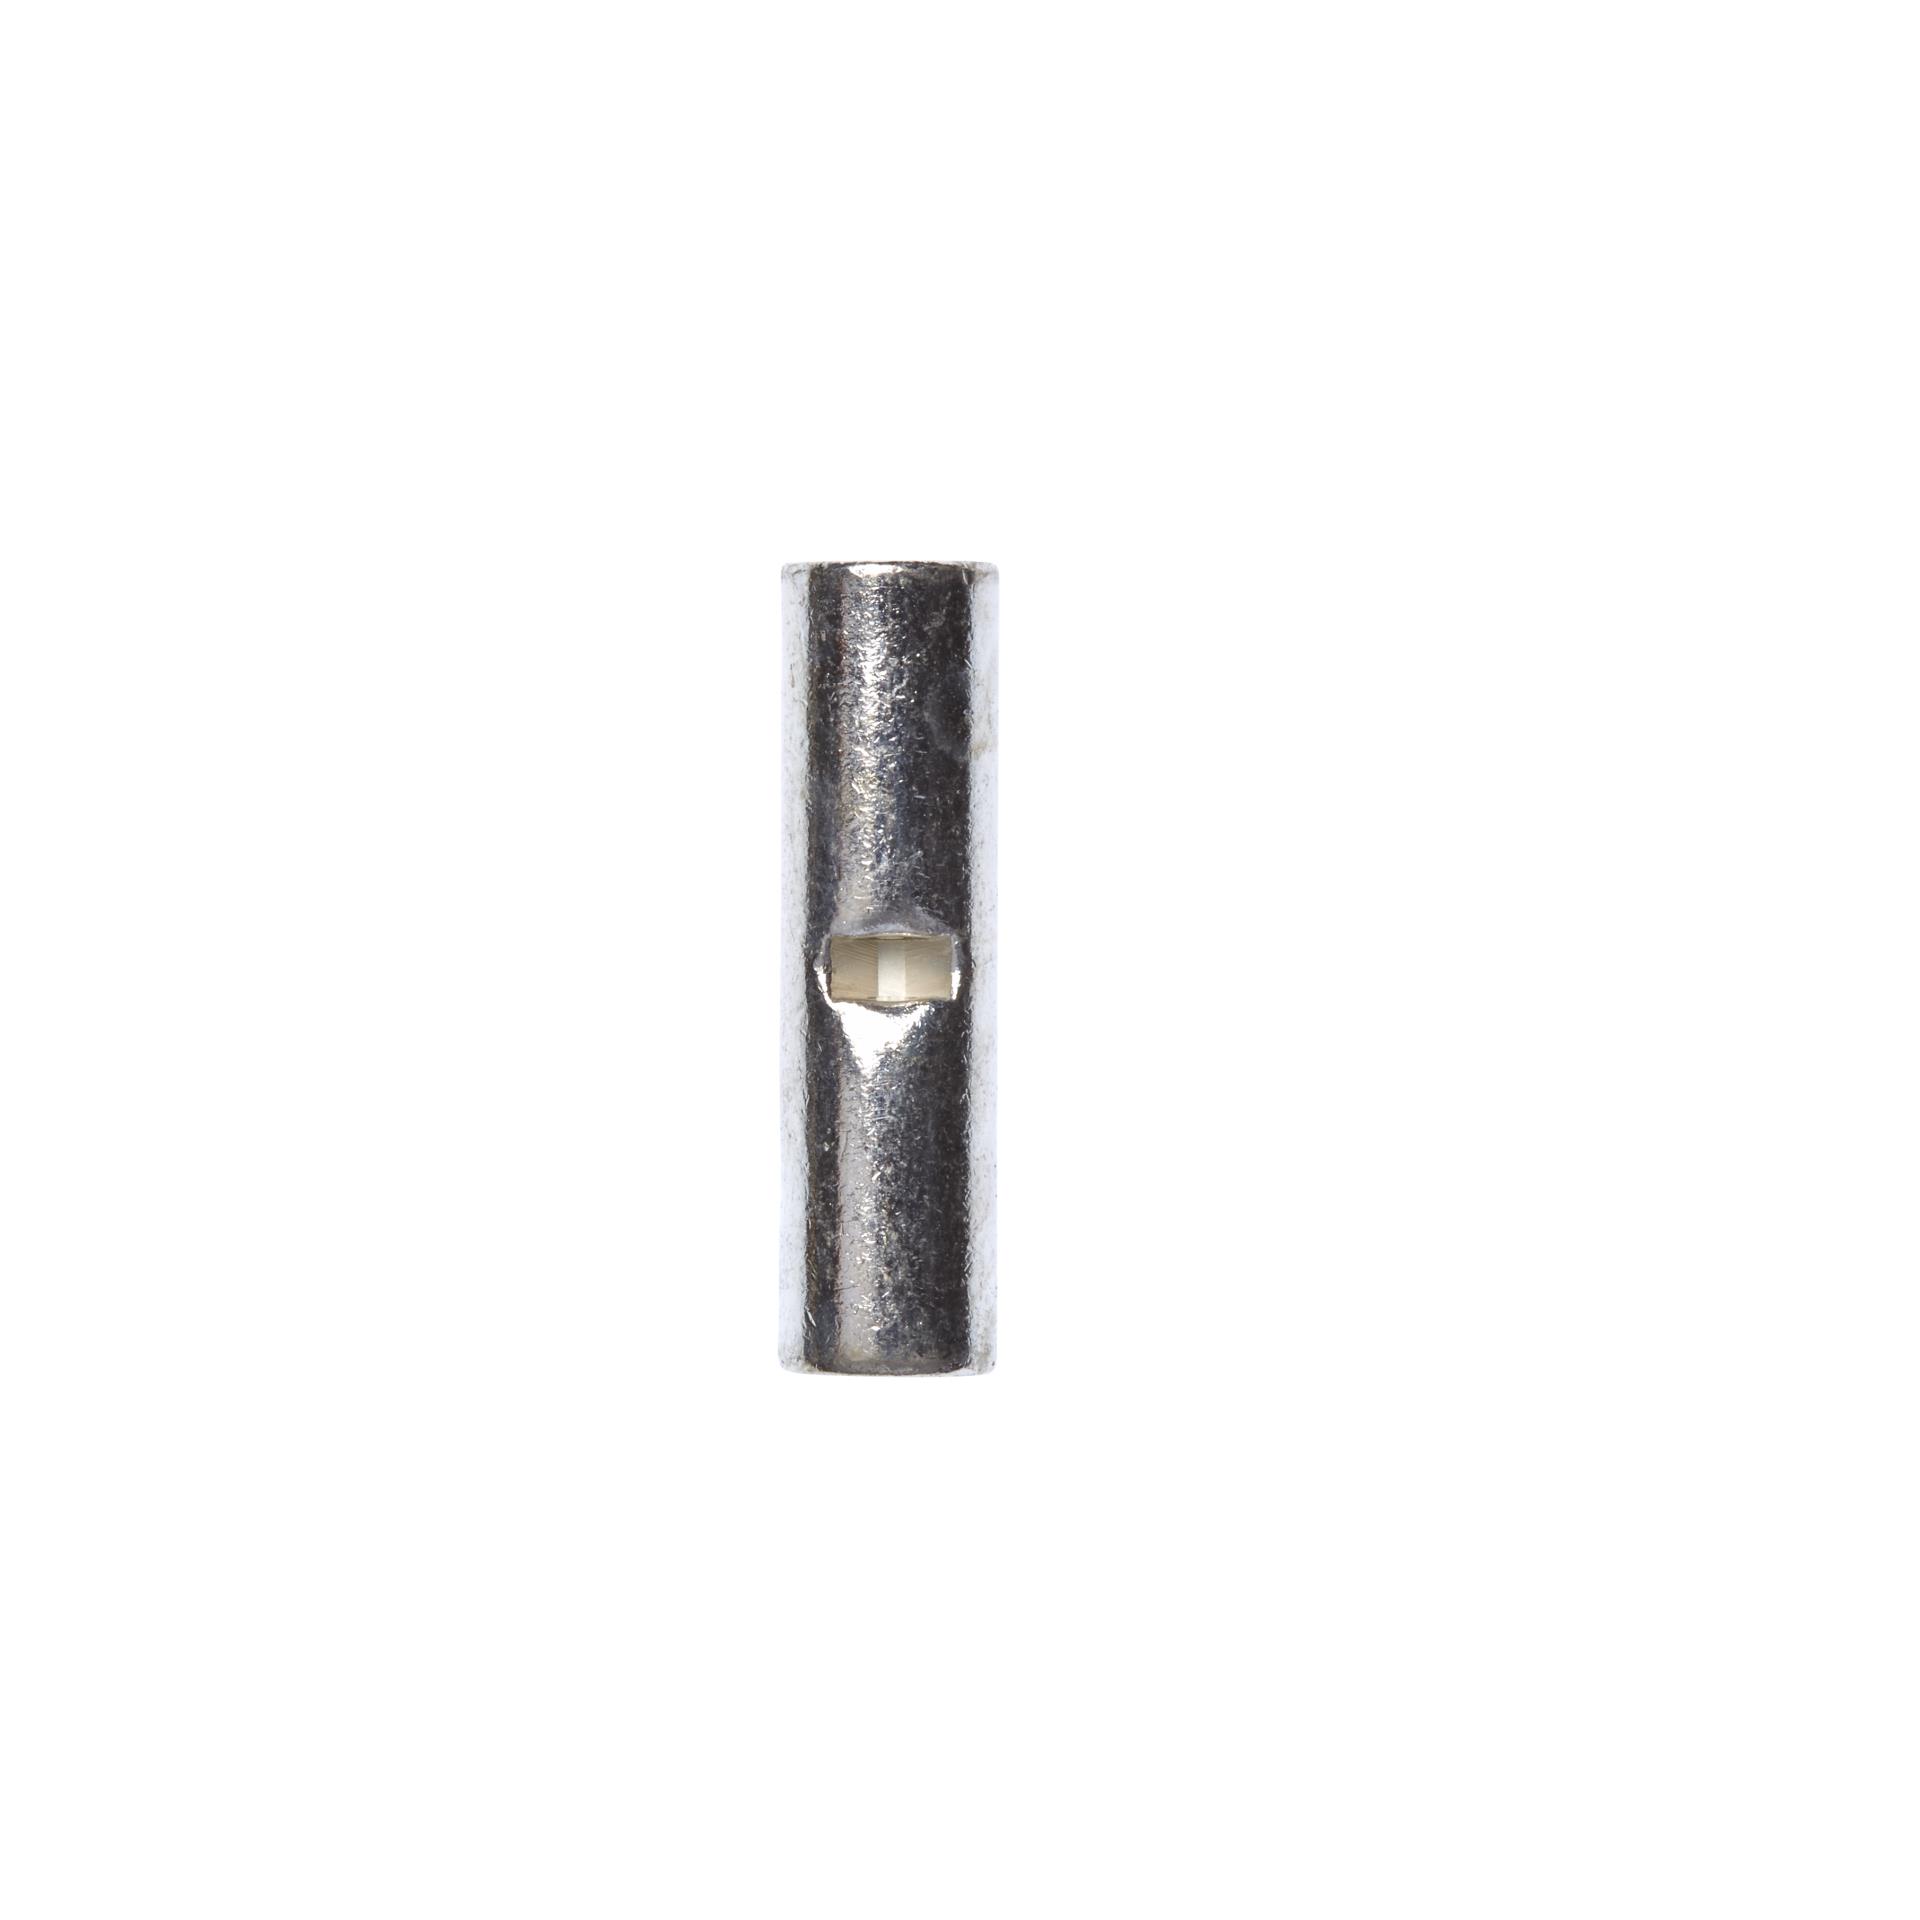 00051128587263 3M™ Scotchlok™ Butt Connector Seamless Non-Insulated,  50/bottle, M10BCX, built-in wire stop for correct positioning, 500/Case  Aircraft products crimp-splices 6325838